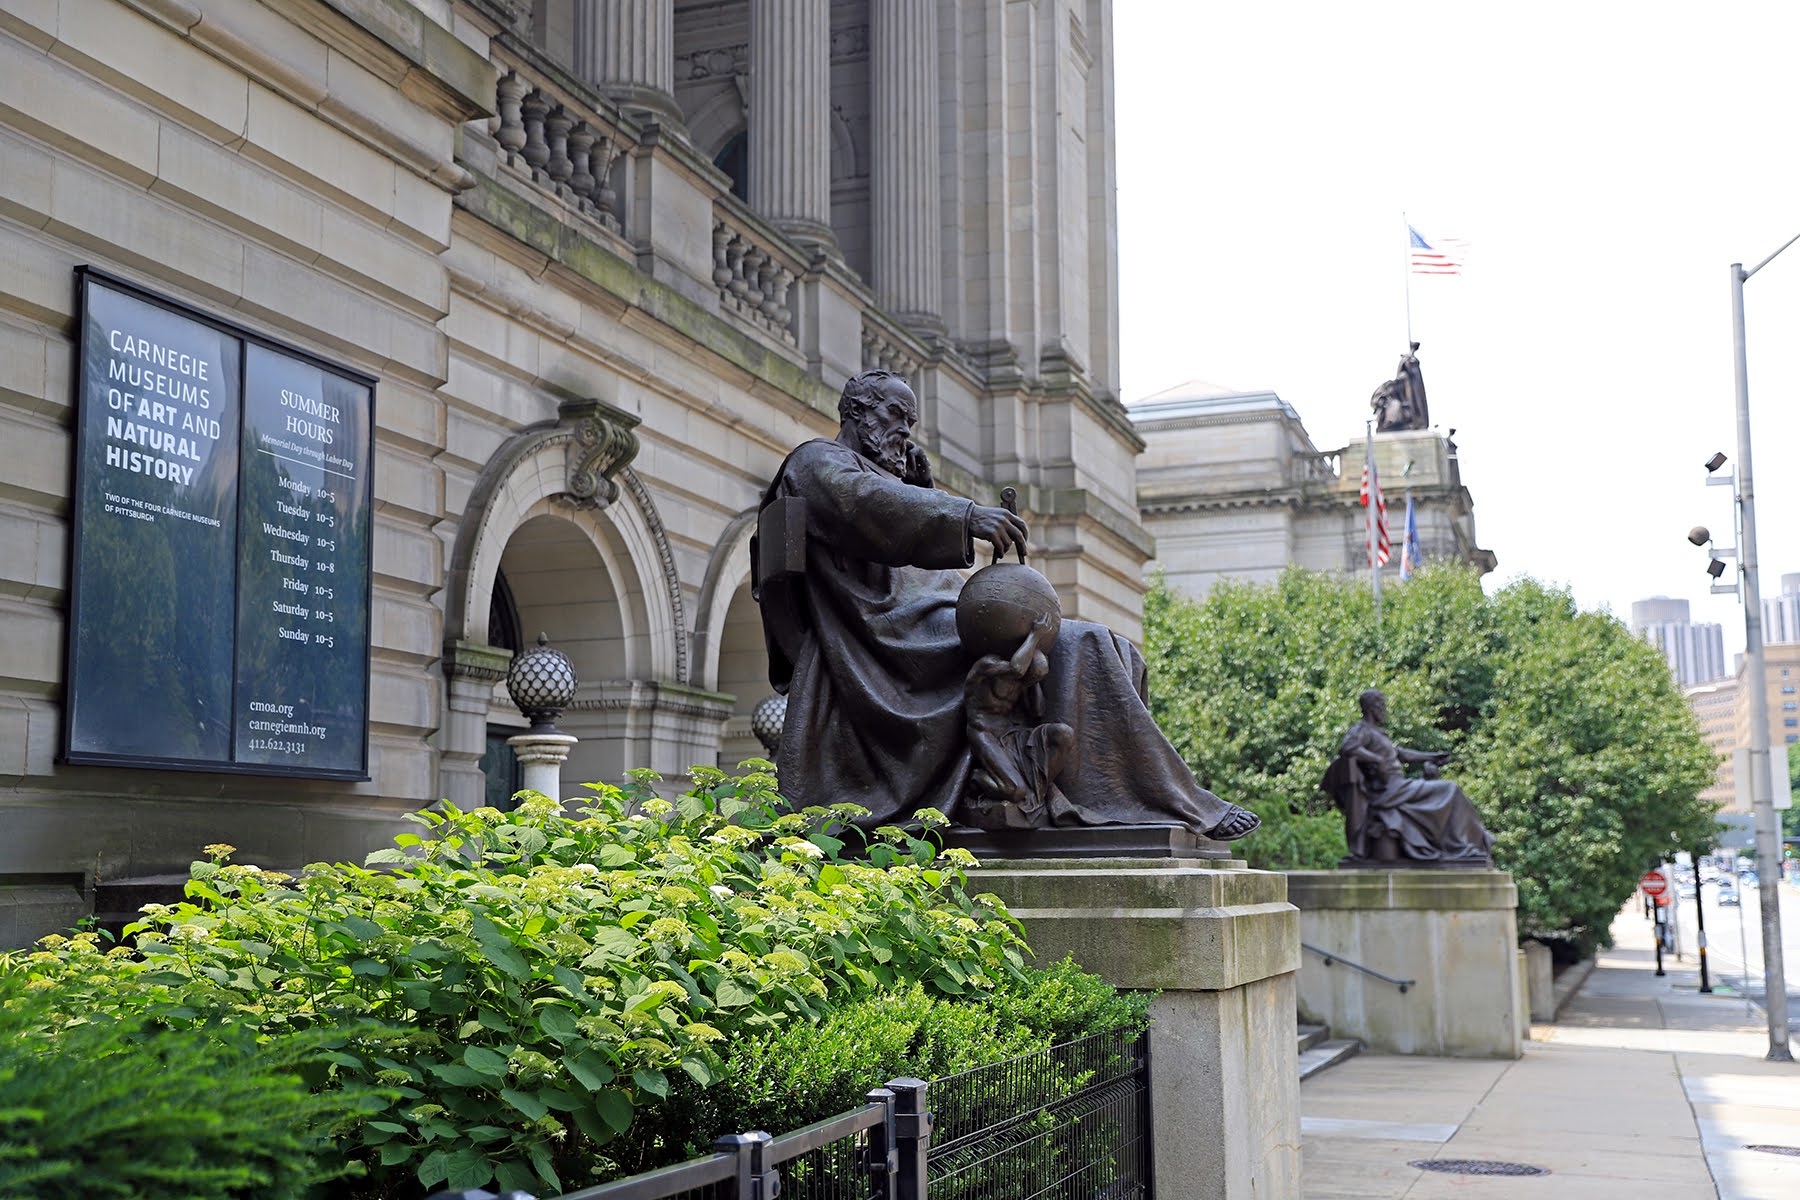 Photograph of the outside of the Carnegie Museums of Art and Natural History. It’s a big, classical style building with two metal statues of scientific leaders out front. Though this entrance has stairs, the museum also has an accessible entrance.